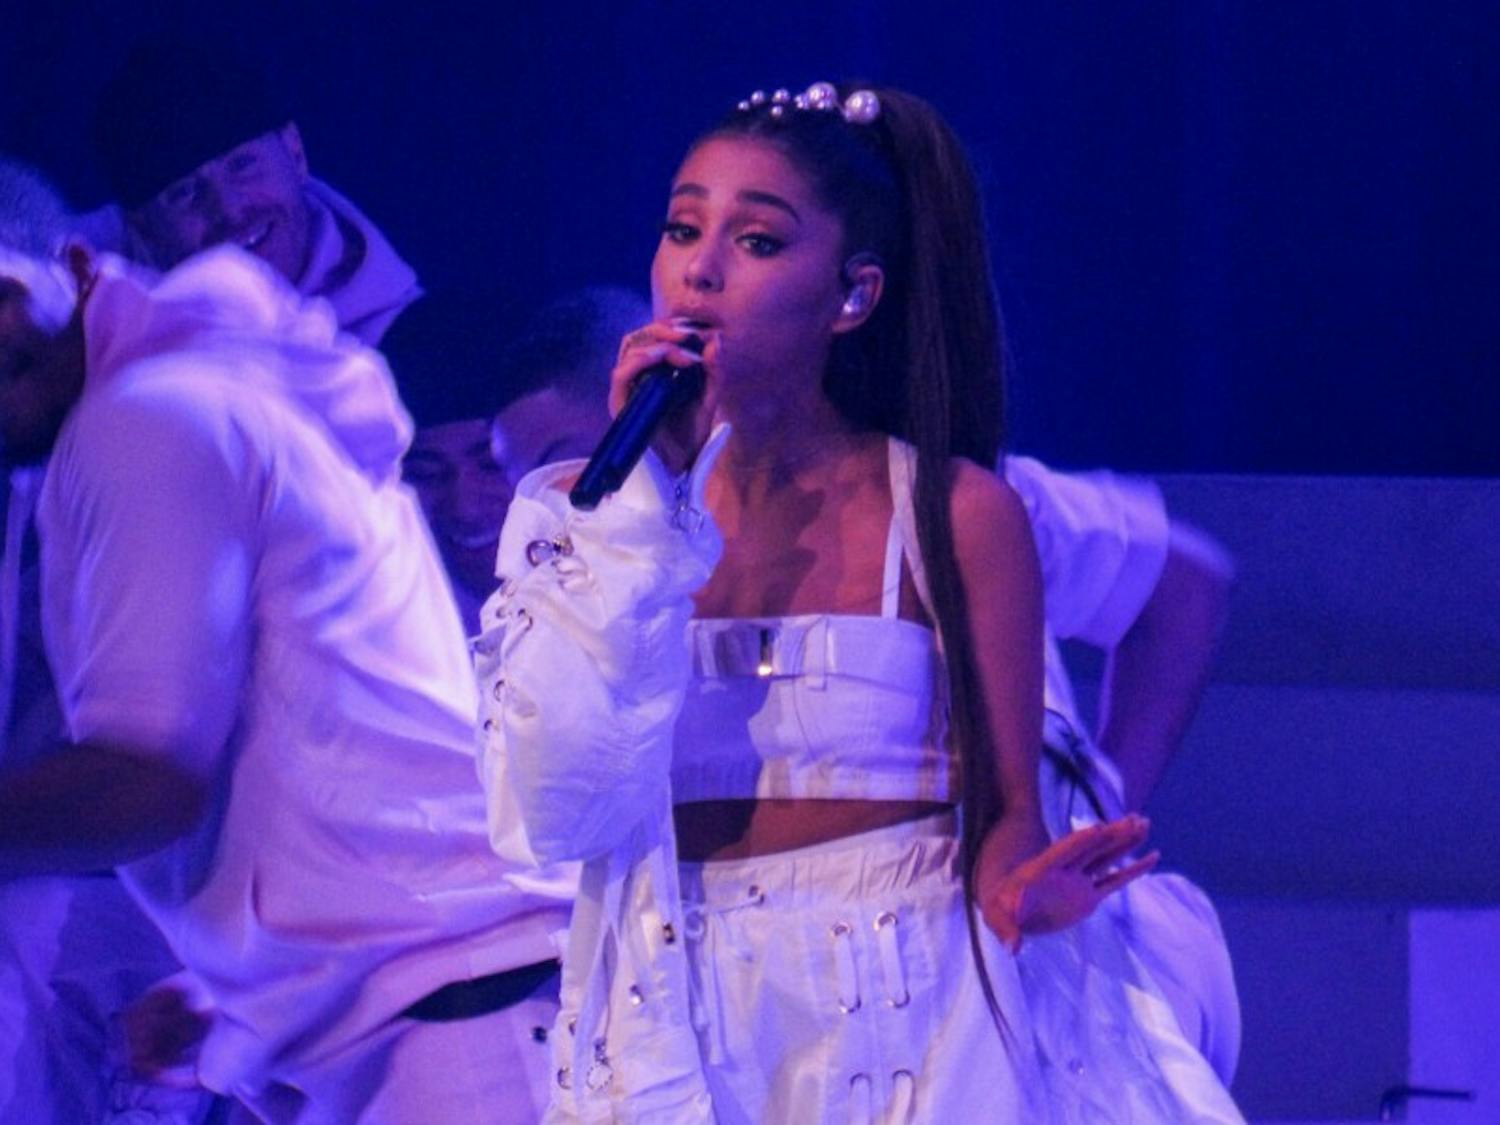 On June 4, Ariana Grande hosted a benefit concert in Manchester, England.&nbsp;